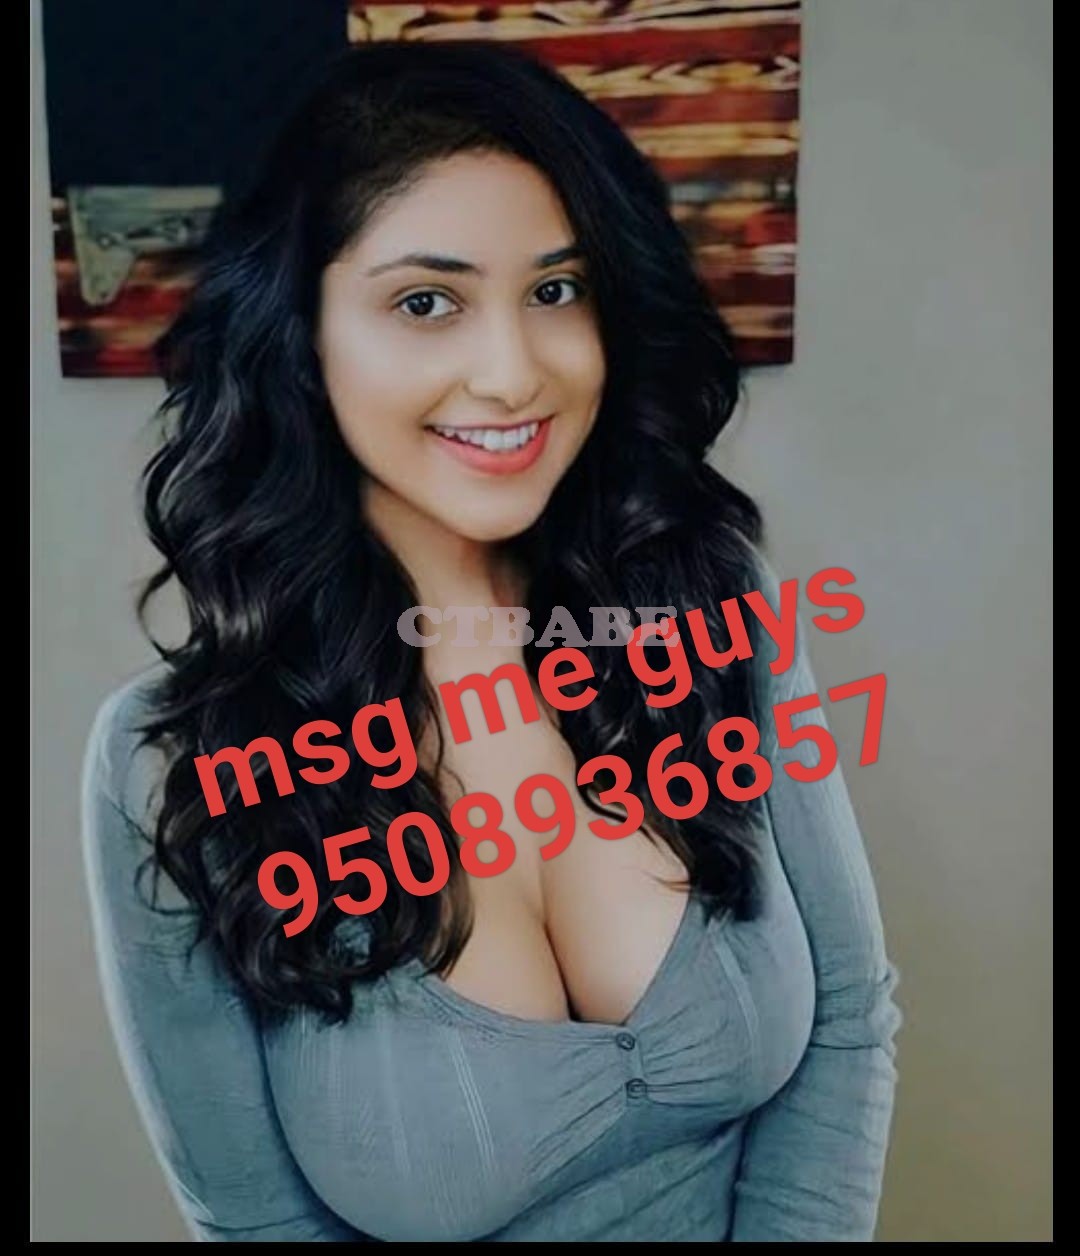 Call me ☎️☎️☎️ guys safe and secure service with High profile ❤️❤️ at low price 